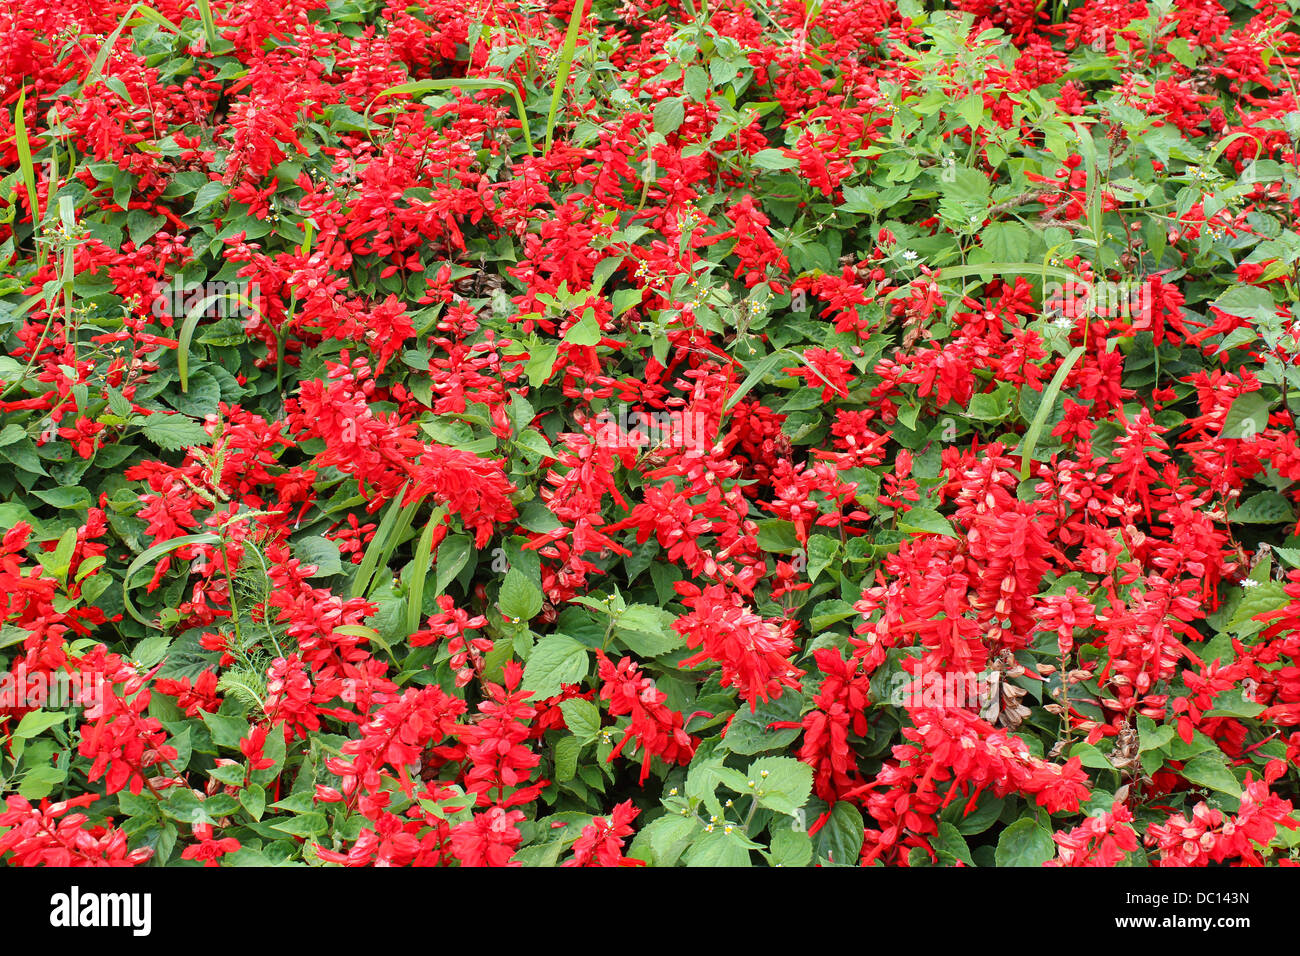 image of beautiful bed with flowers of salvia Stock Photo